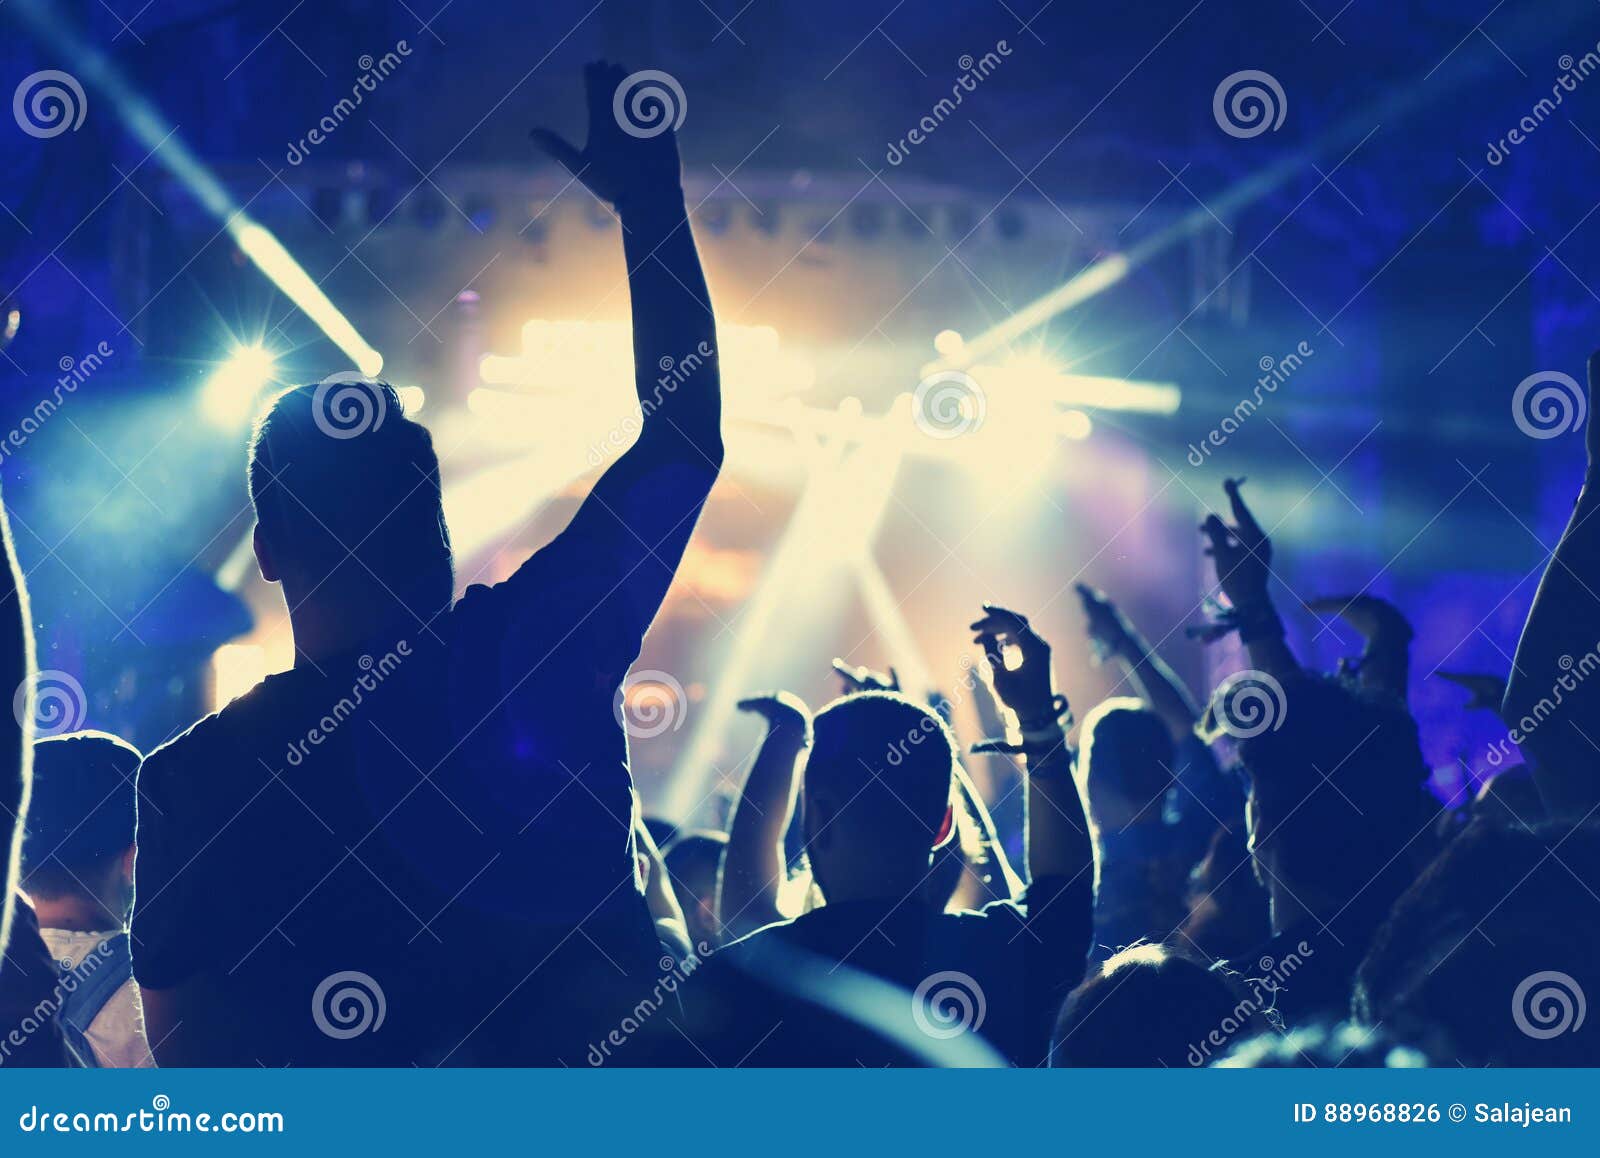 Crowd with Arms Outstretched at Concert Stock Photo - Image of ...